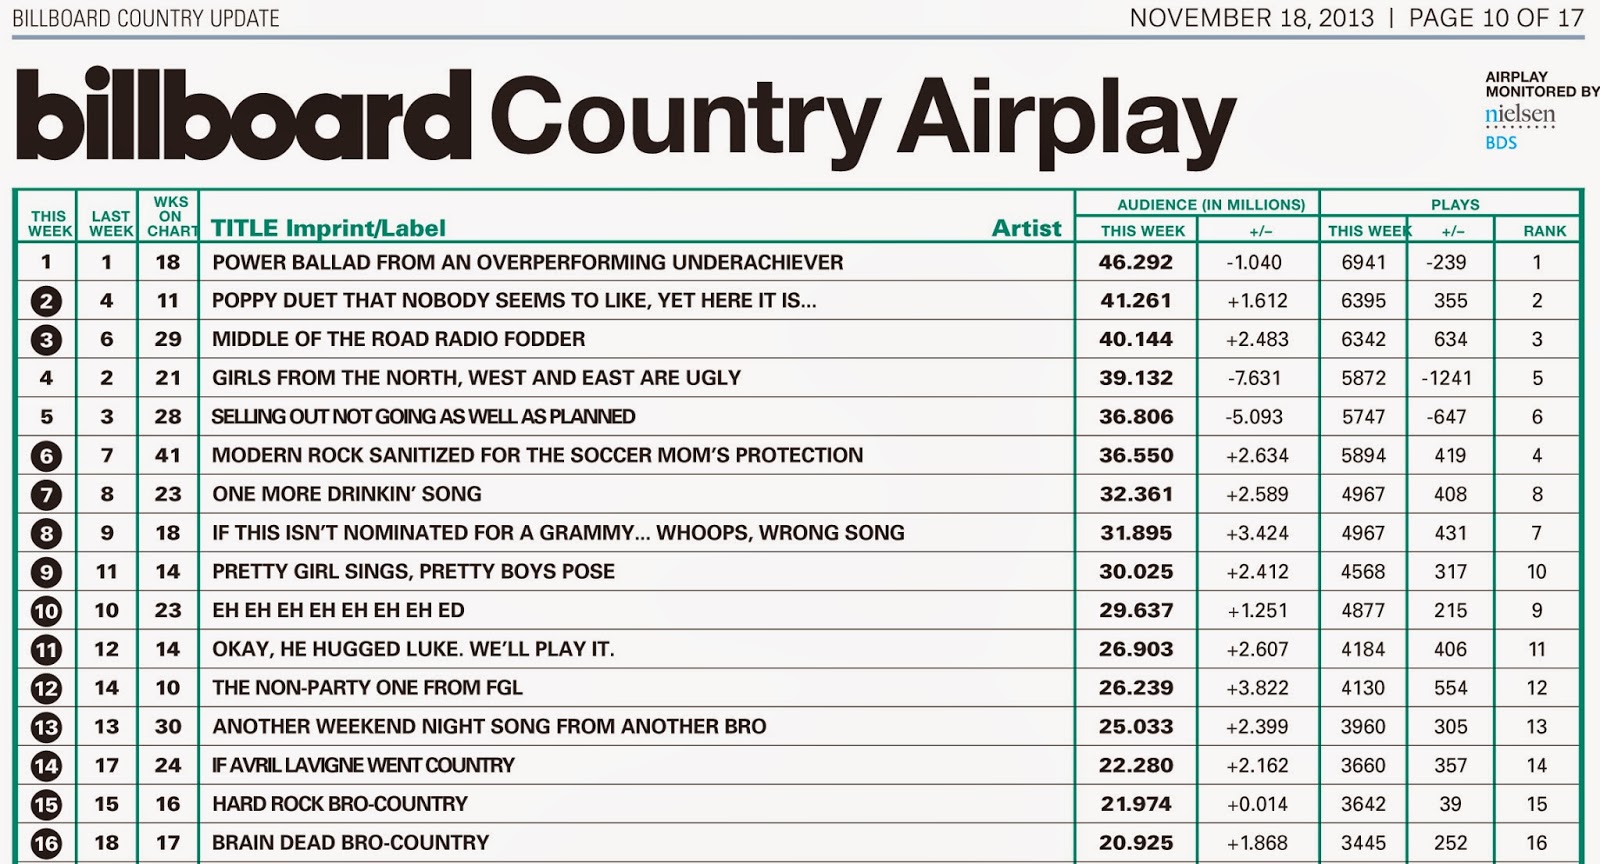 Country Charts